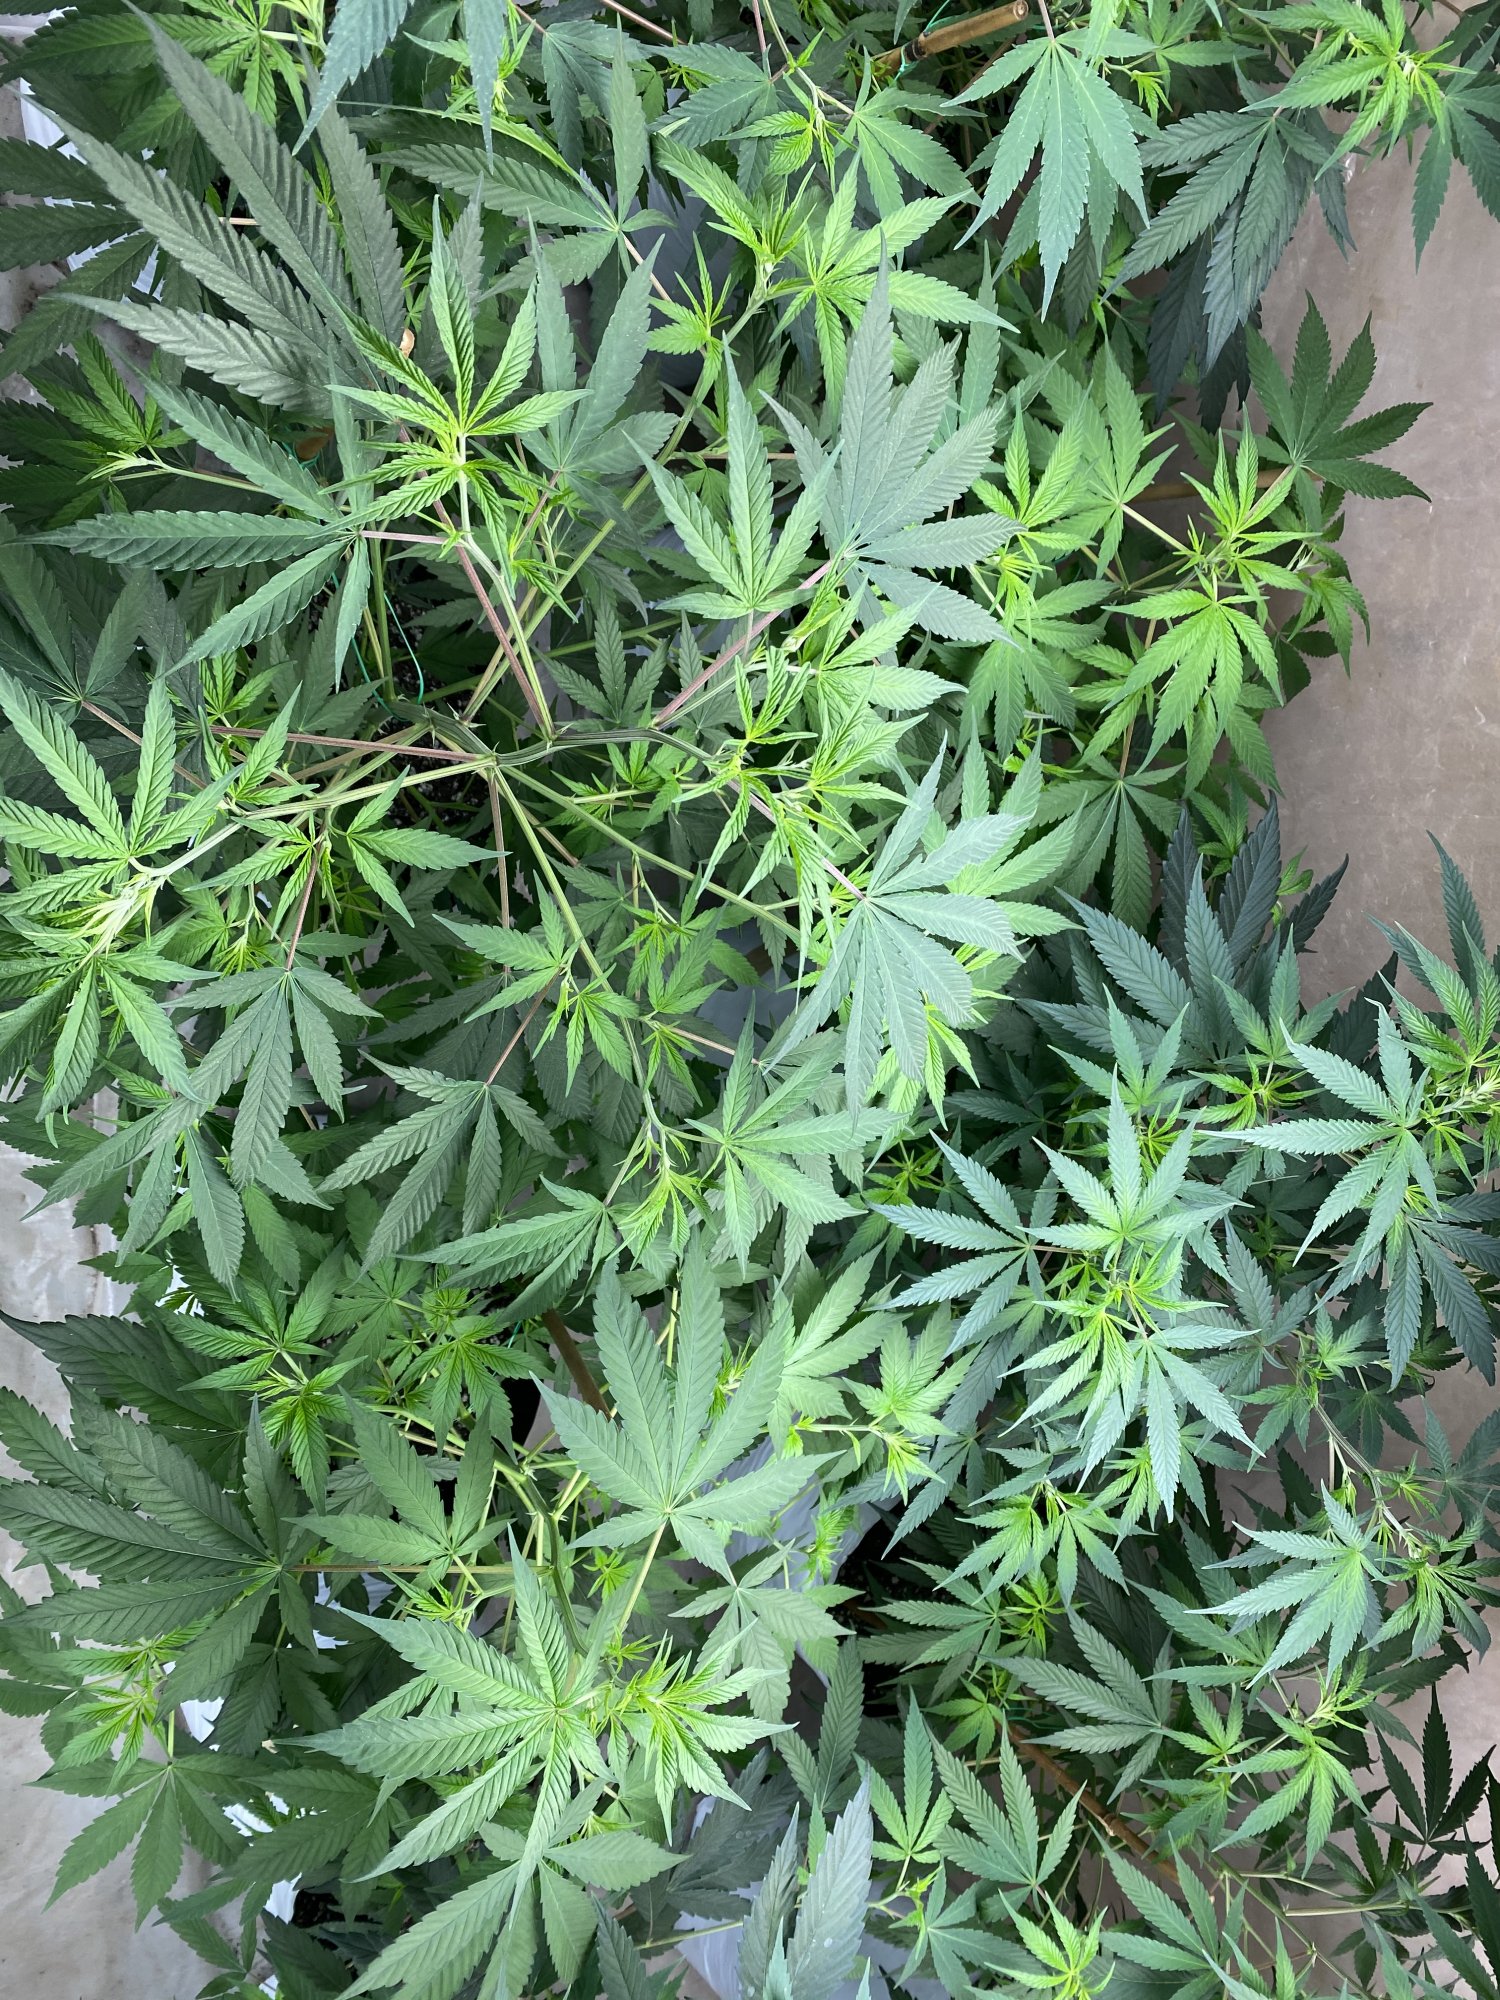 Question about introducing nutes to my grow along with ocean forest soil 2